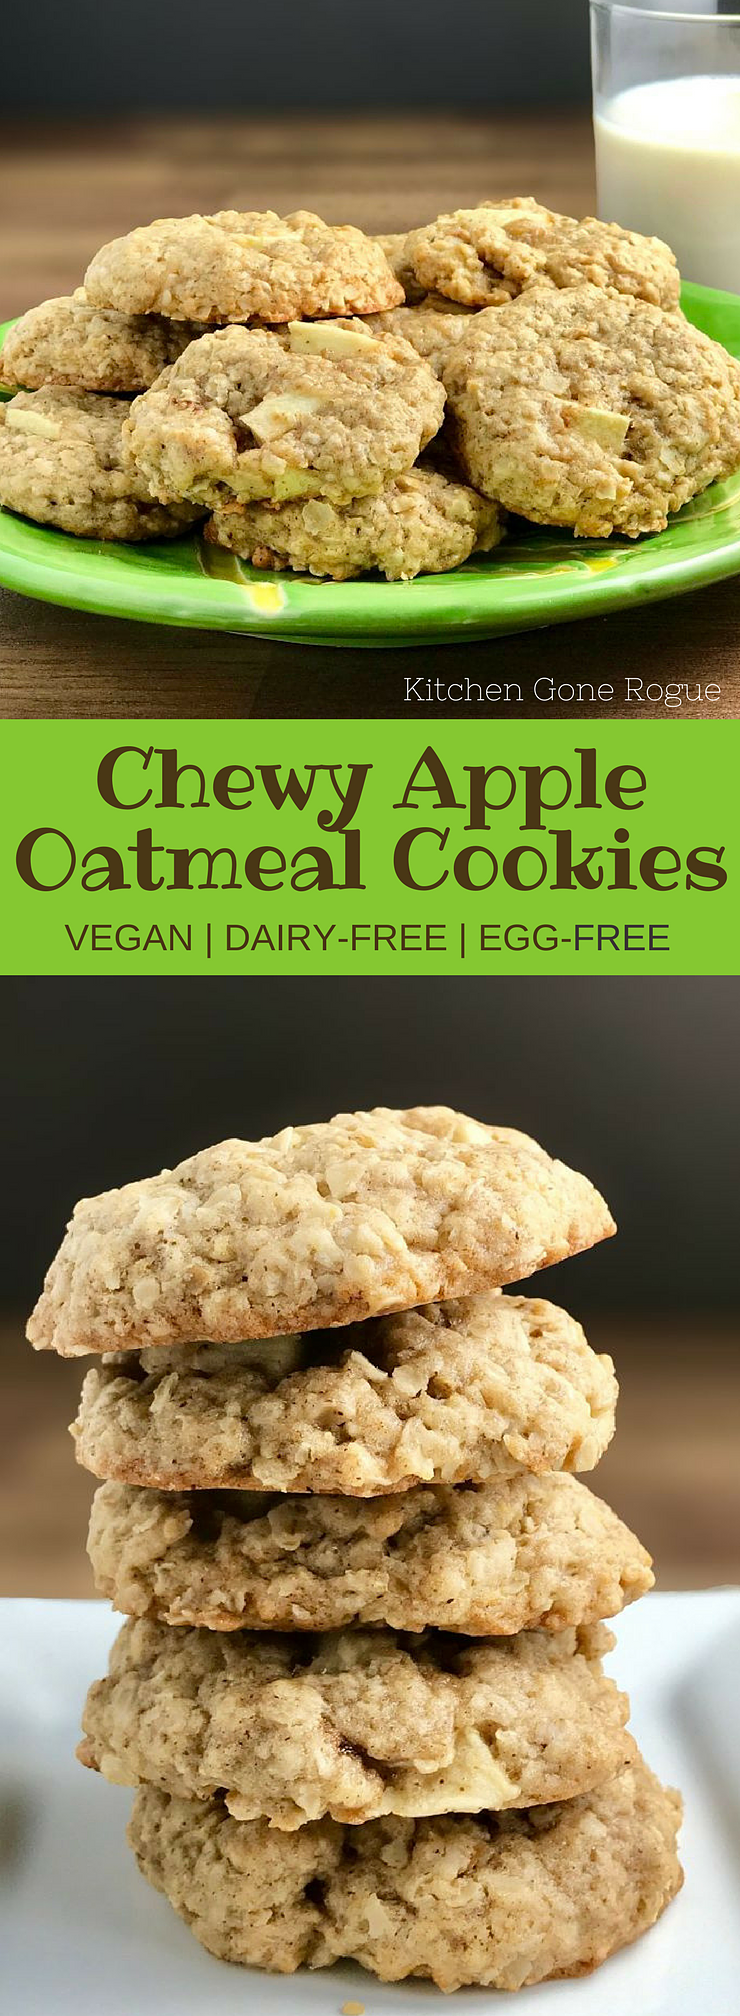 Vegan Chewy Apple Oatmeal Cookies Dairy-Free Egg-Free Kitchen Gone Rogue